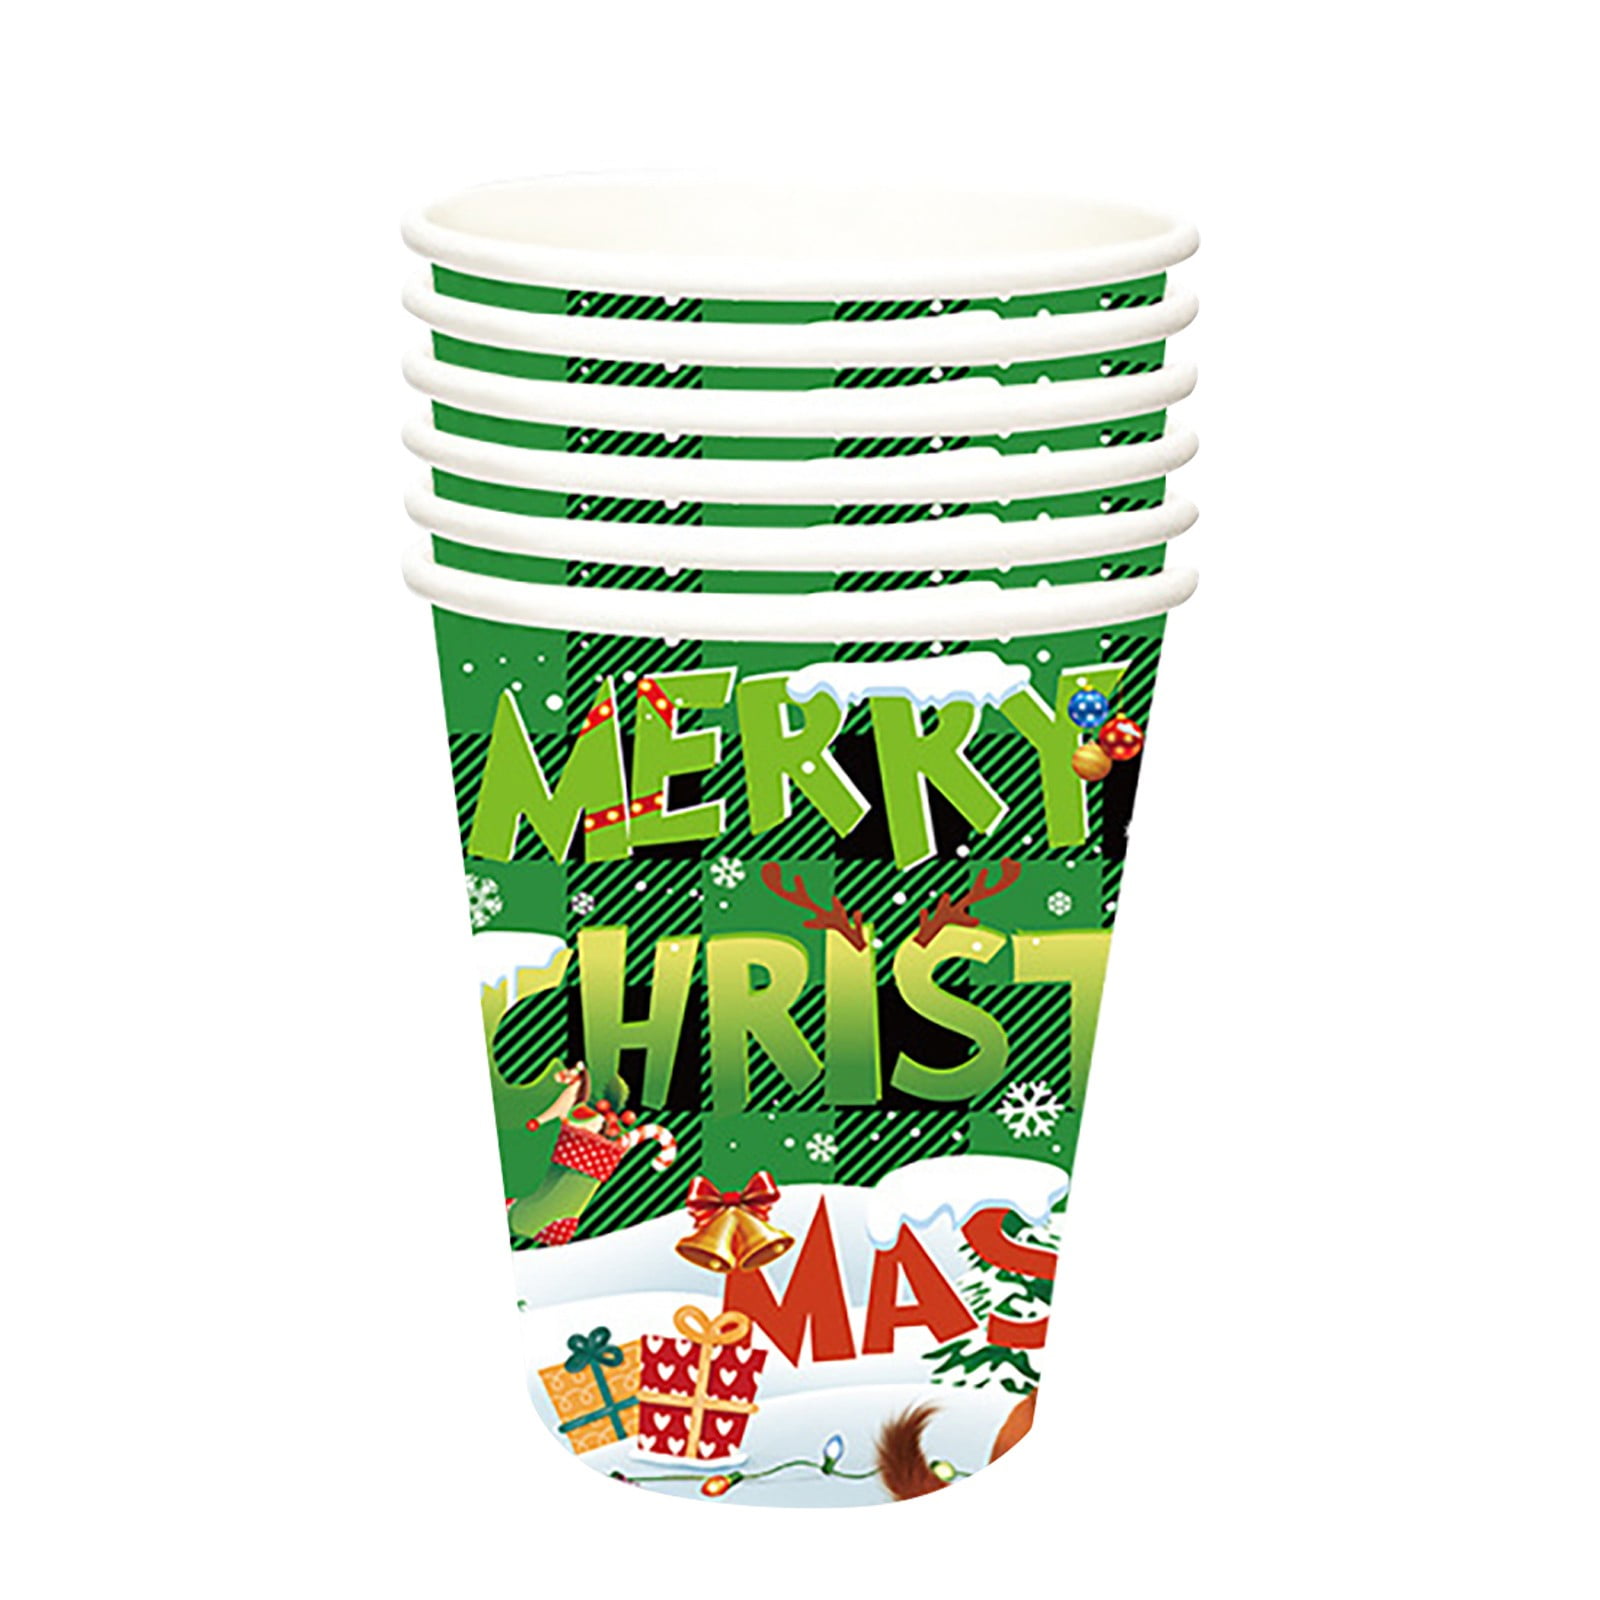  Christmas Grinch Party Supplies Grinch Party Favors